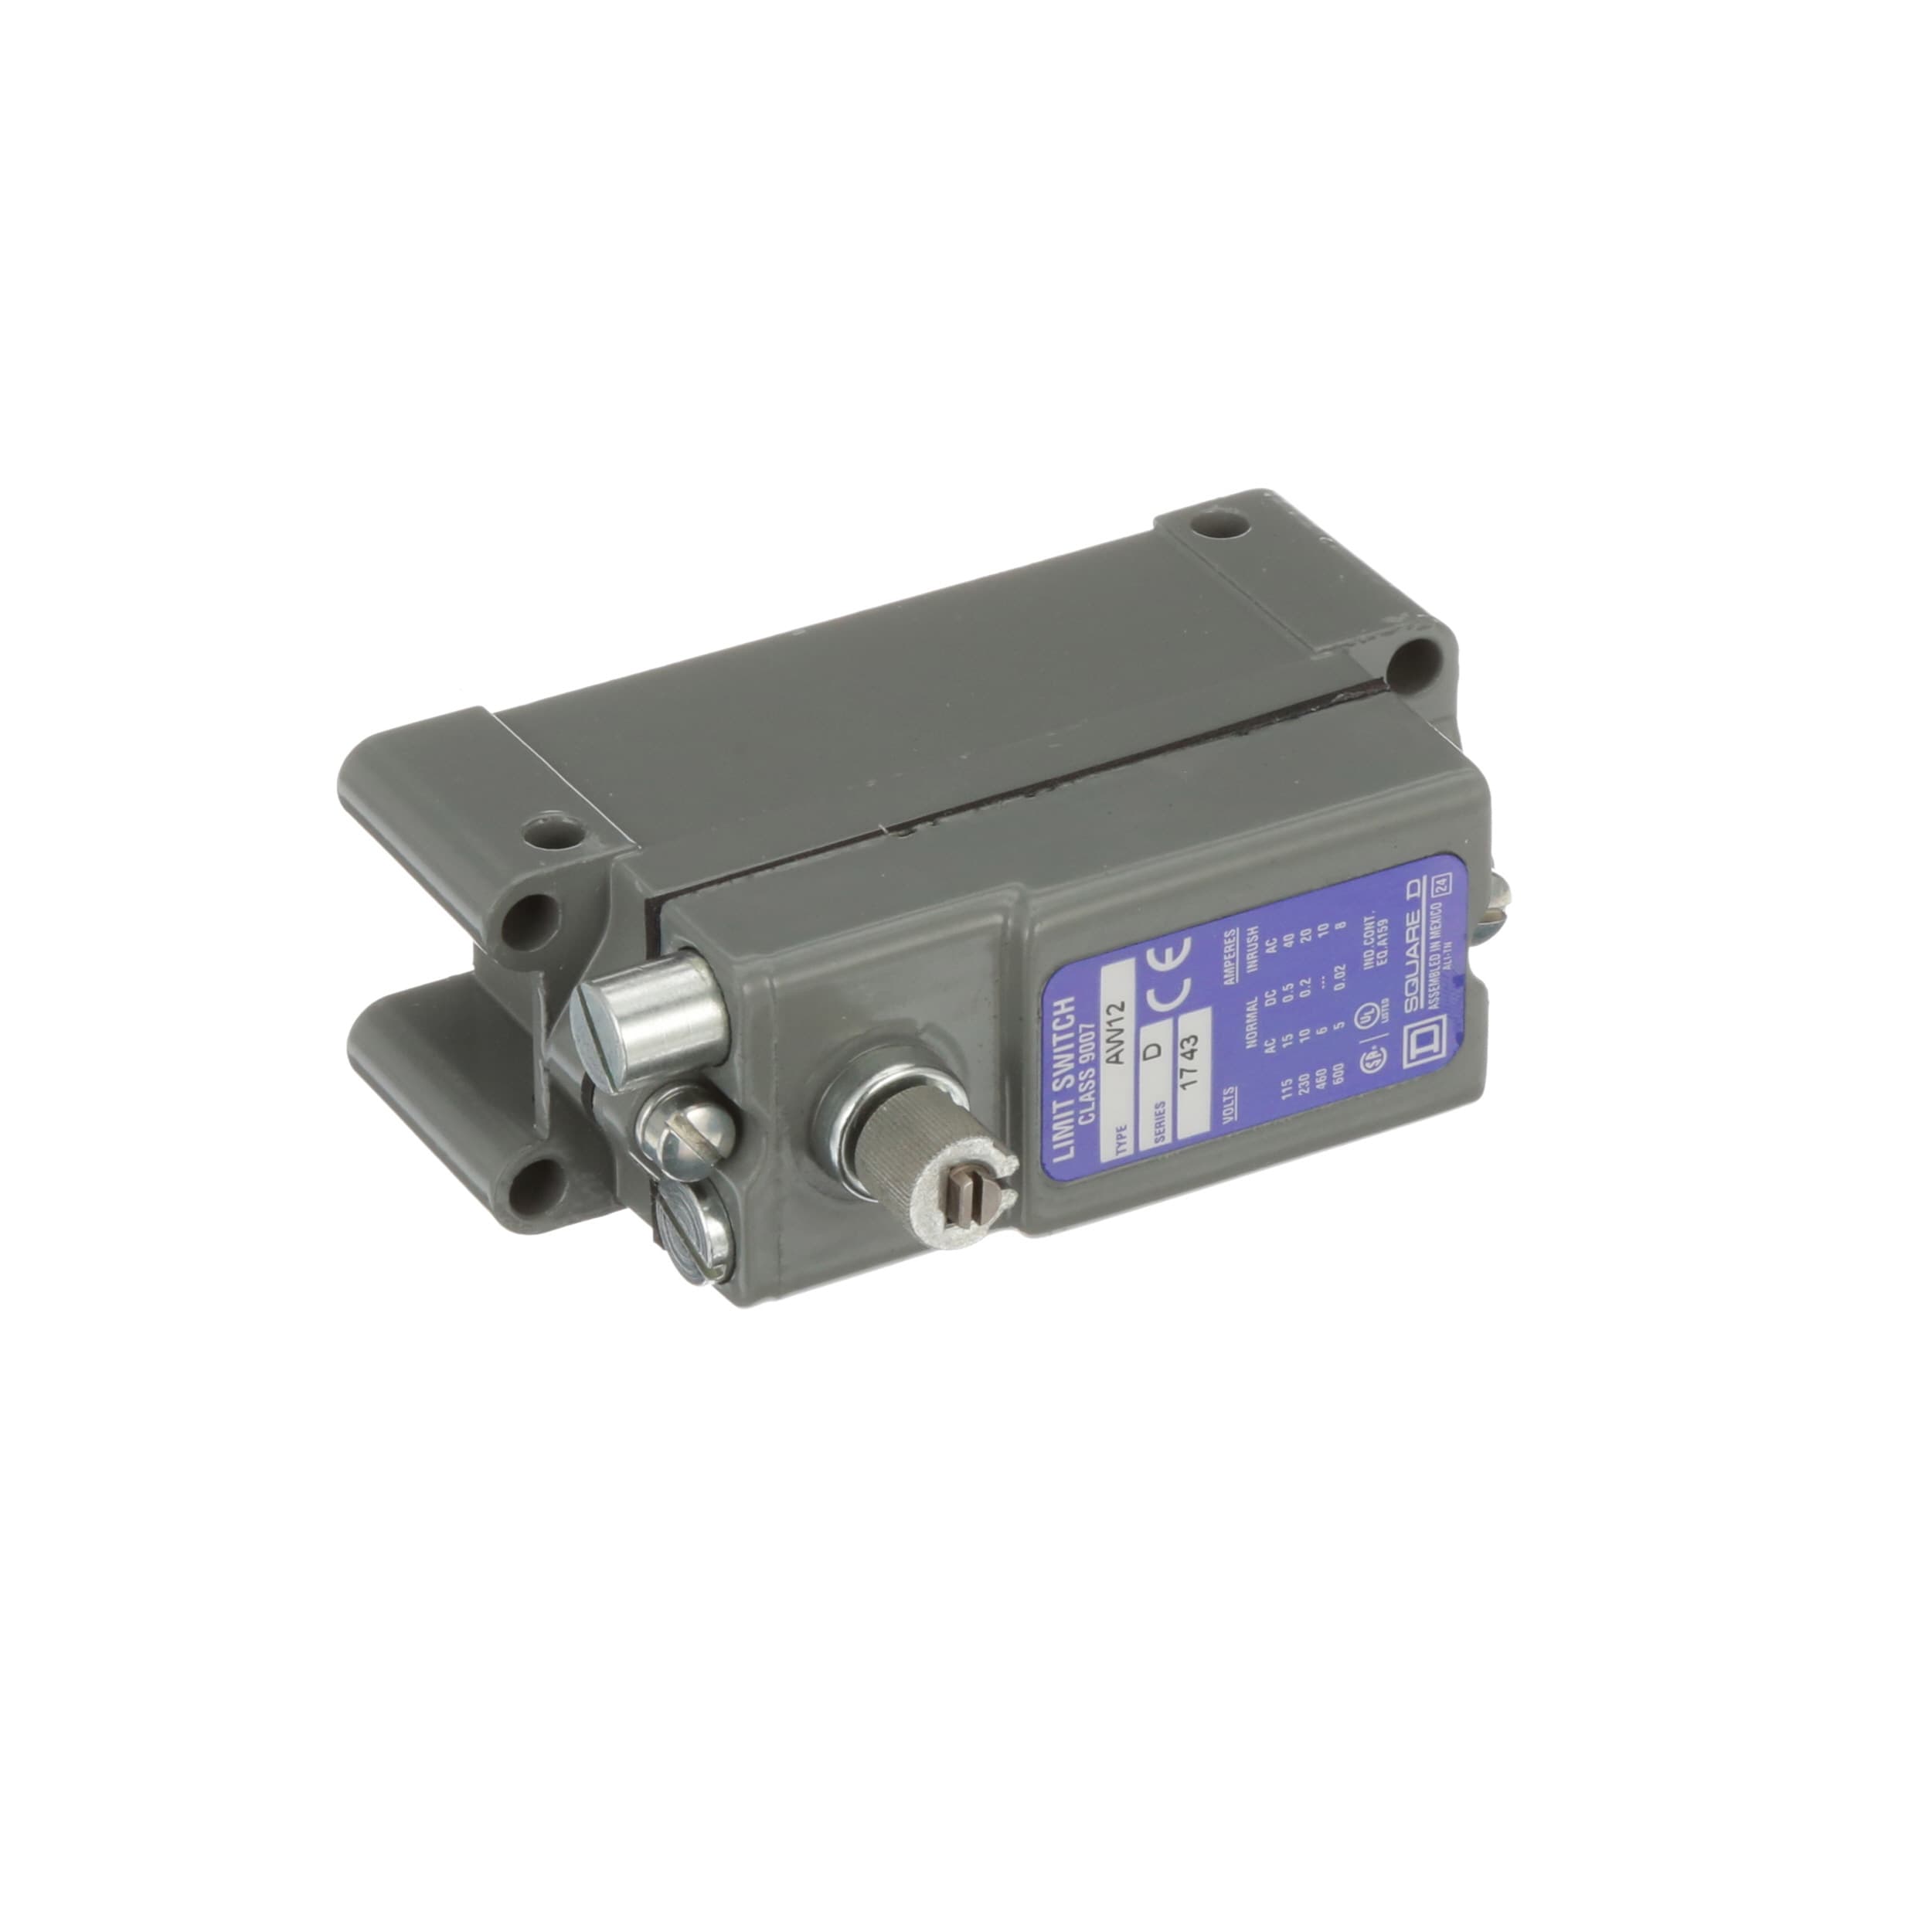 Details about   New Square D 9007 AW36 9007 AW 36  Precision Roller Limit Switch Series A 